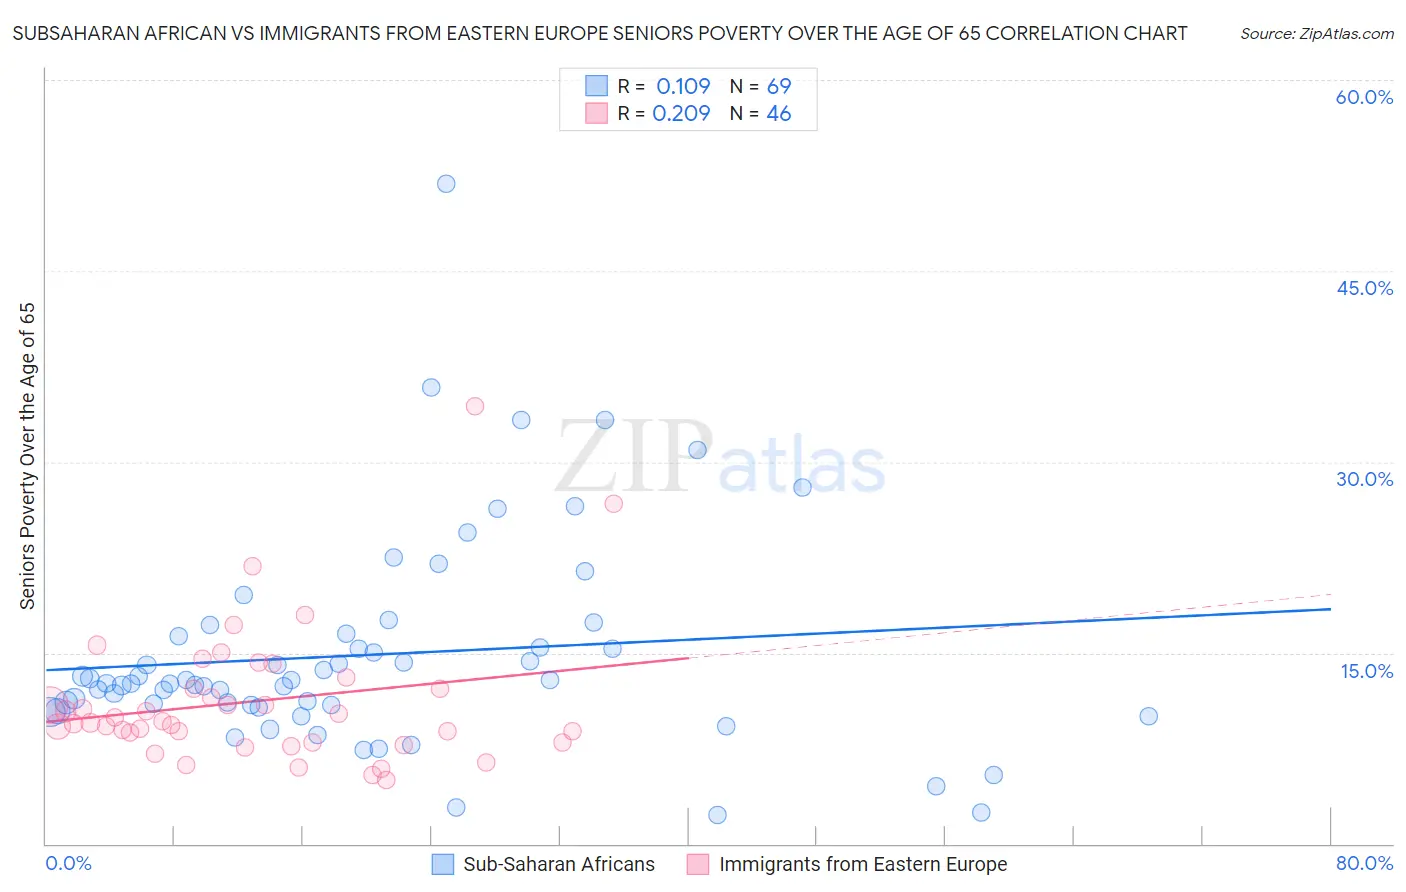 Subsaharan African vs Immigrants from Eastern Europe Seniors Poverty Over the Age of 65